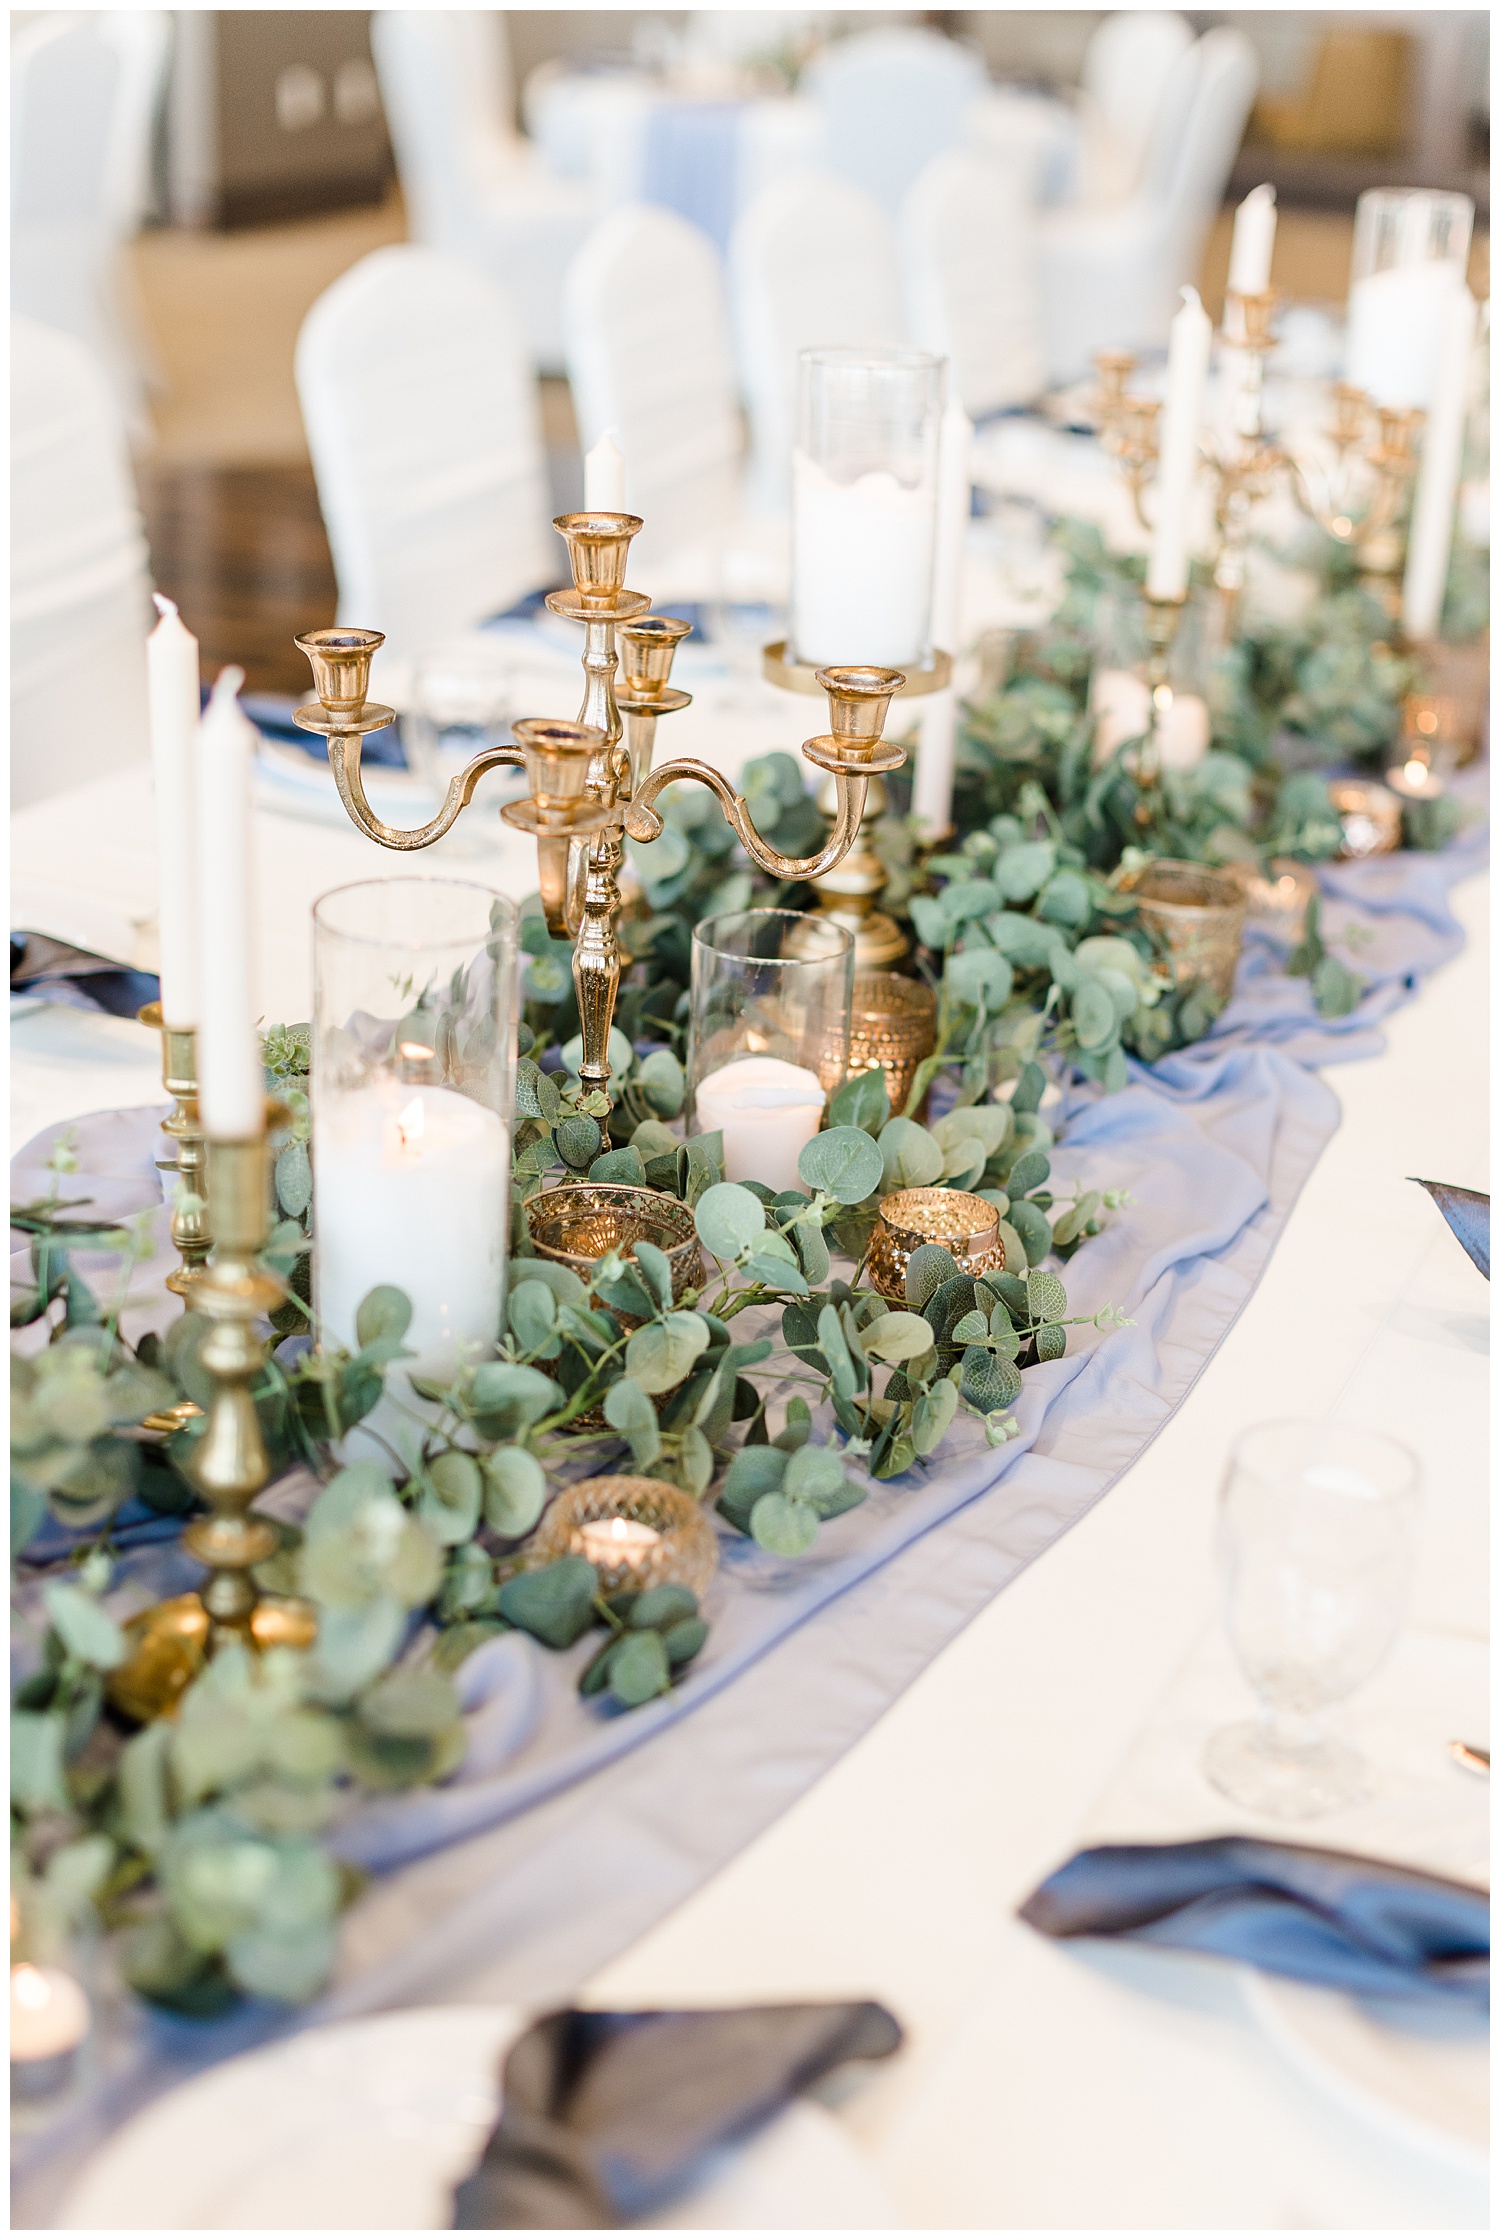 Dusty blue and peach kings wedding table topped with gold vintage candlesticks and eucalyptus at the Shores at Five Island | CB Studio